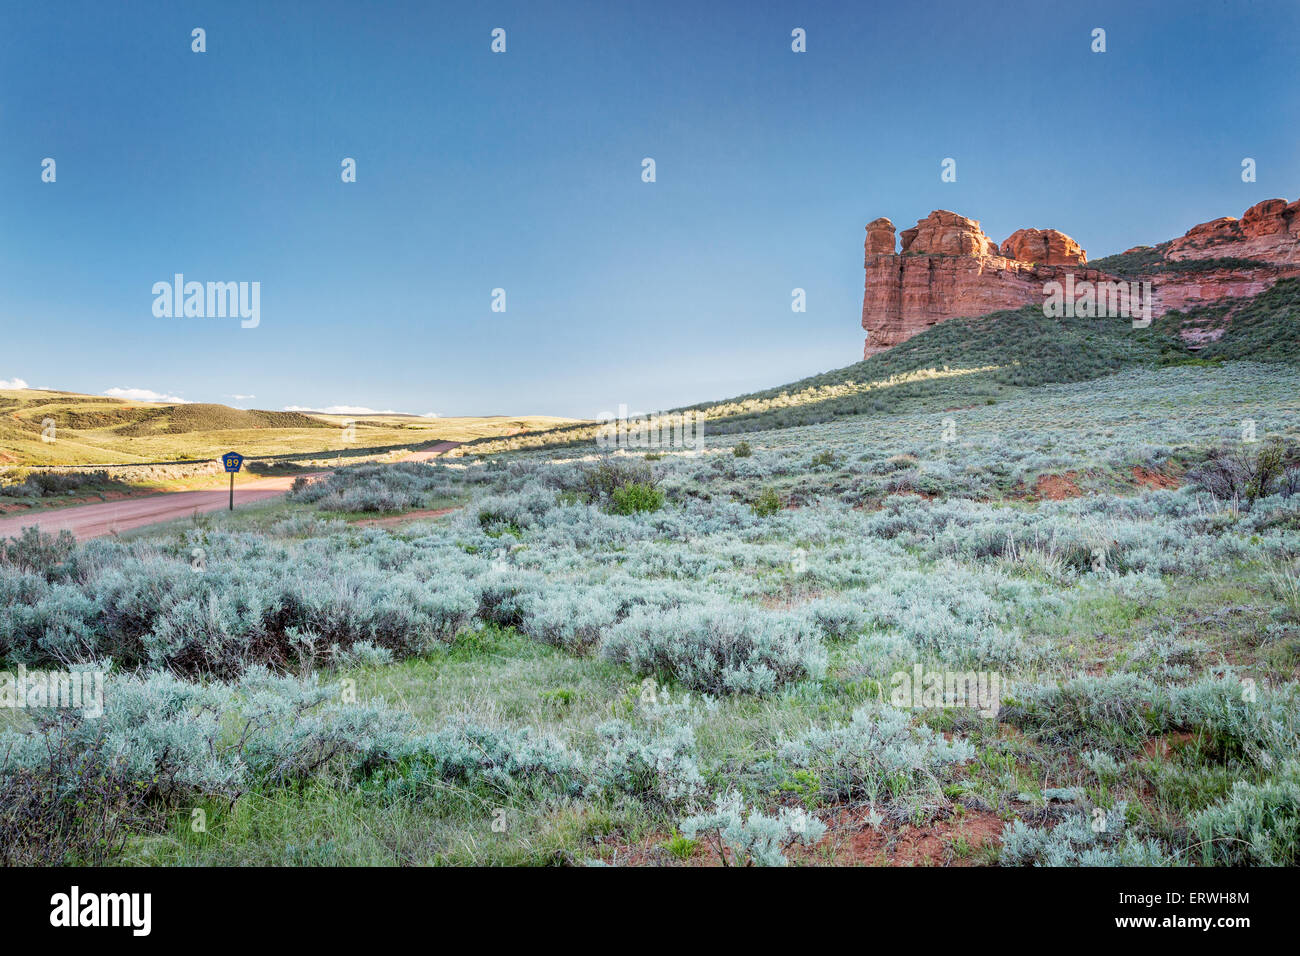 prairie, shrubland and sandstone rock formation in northern Colorado near Wyoming border -Ssnd Creek National Landmark Stock Photo